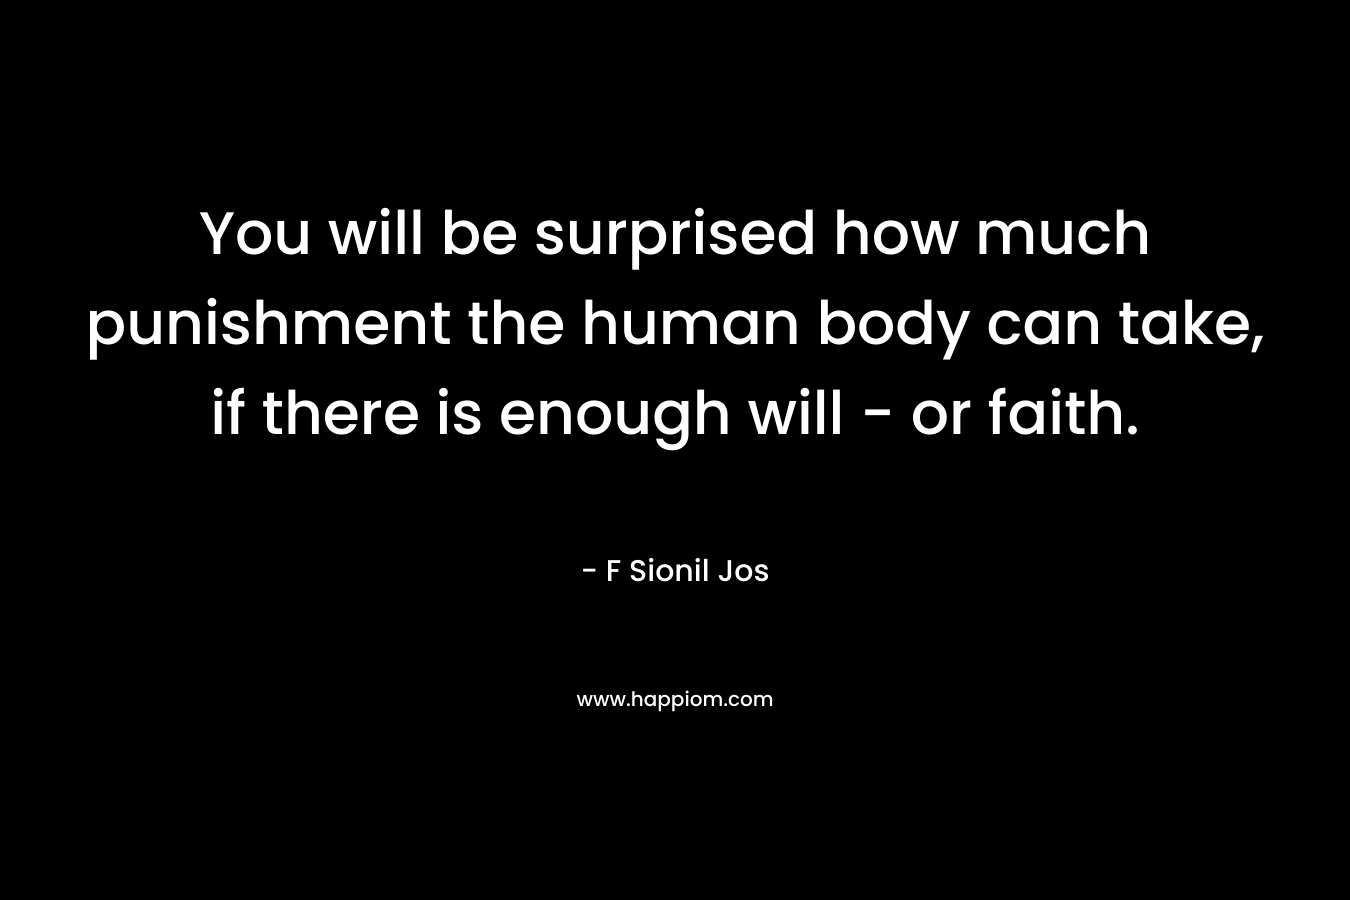 You will be surprised how much punishment the human body can take, if there is enough will - or faith.